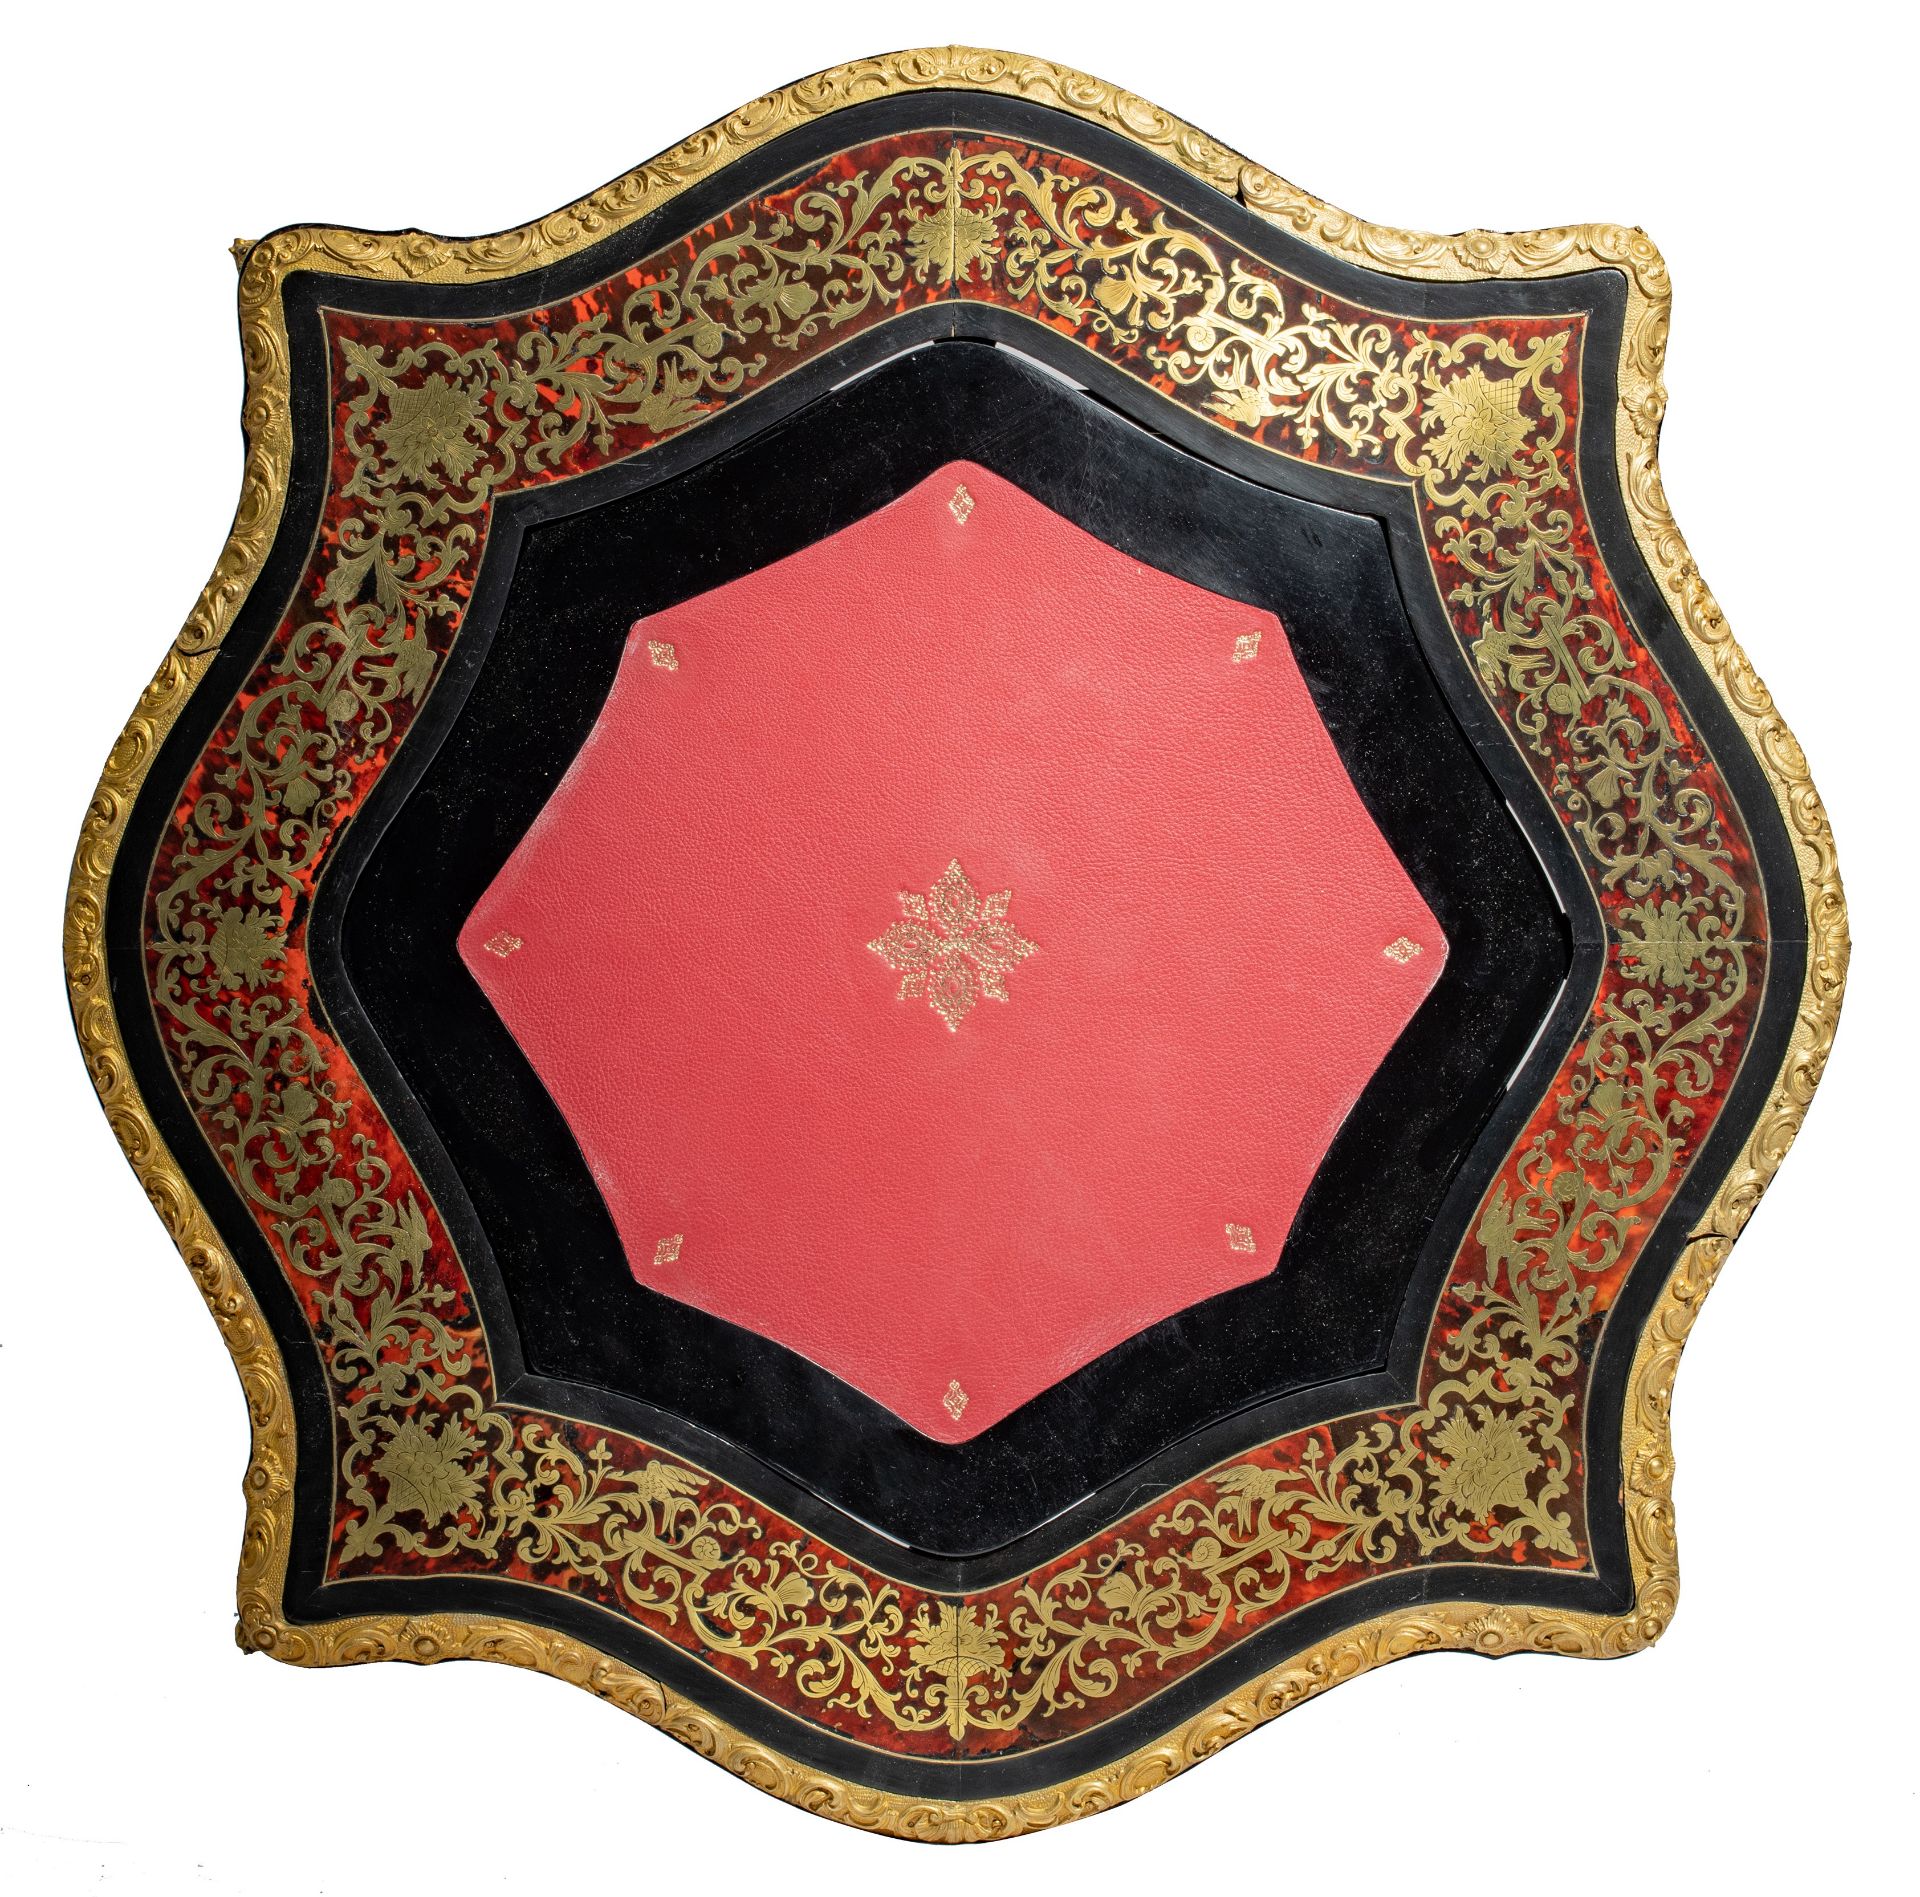 A fine Napoleon III Boulle work games table, with gilt bronze mounts and a red leather inlaid playin - Image 6 of 11